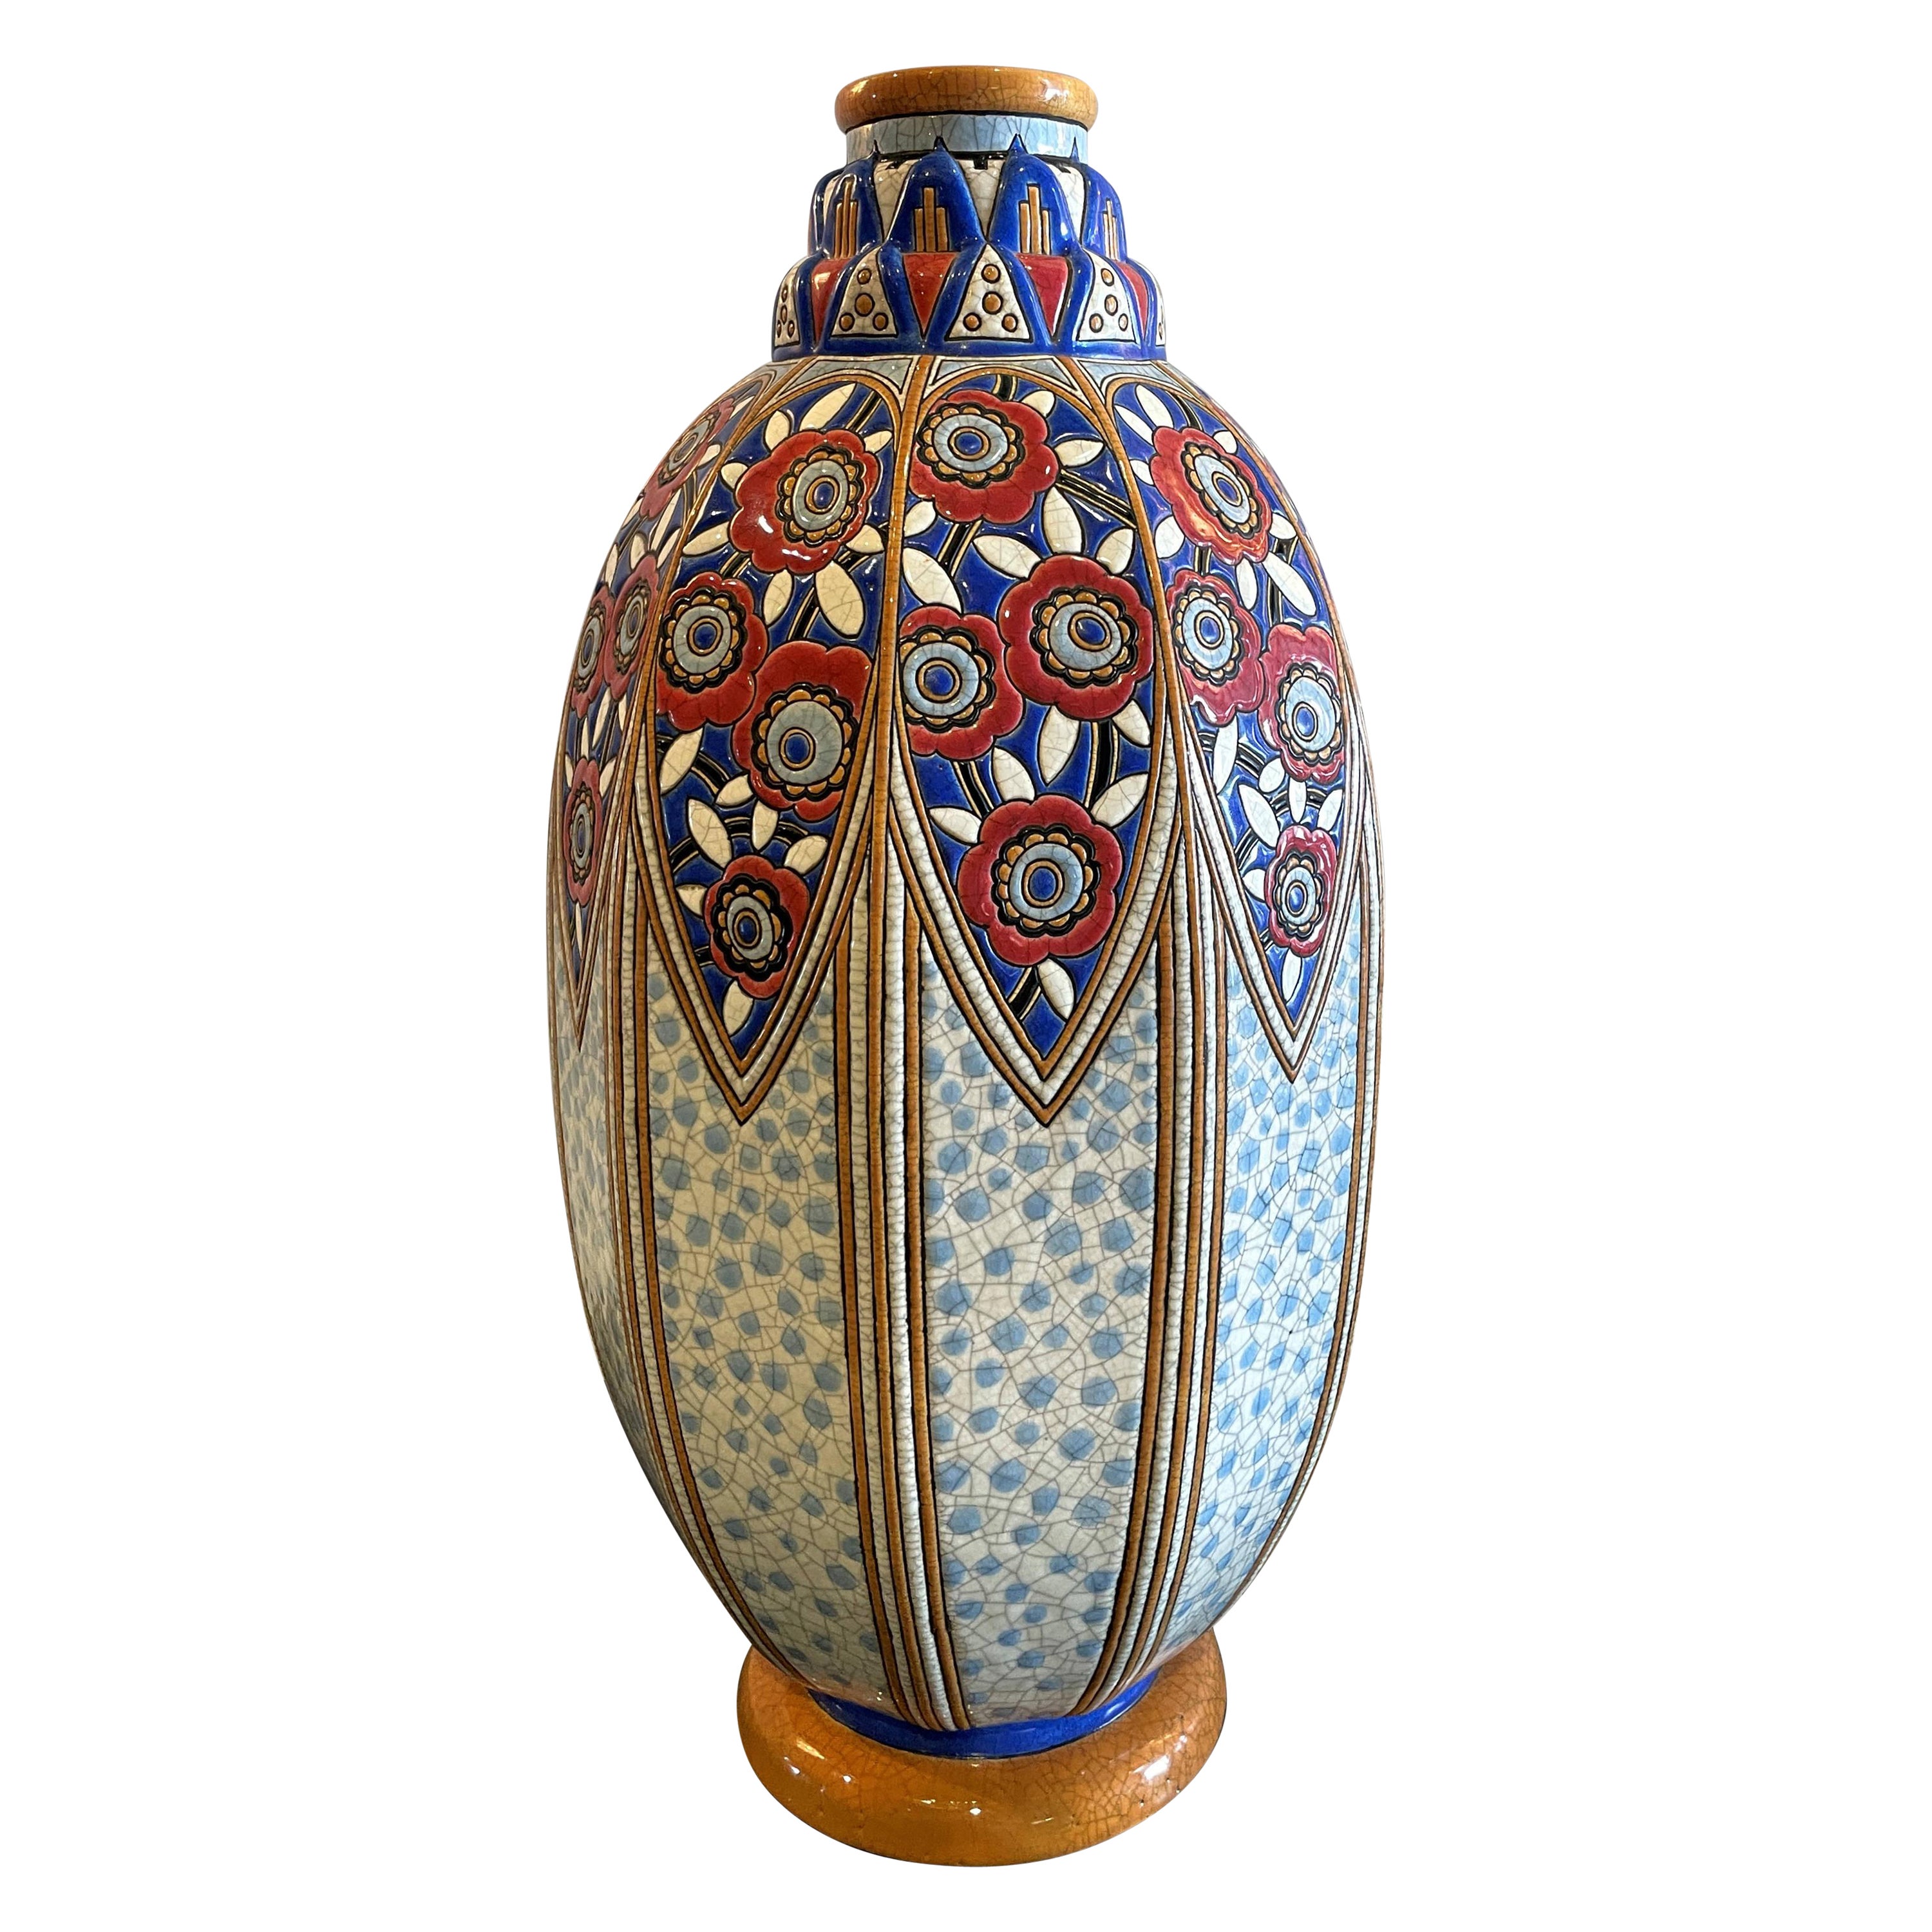 Unique Longwy French Art Deco Vase by Maurice Paul Chevalier June 15, 1928